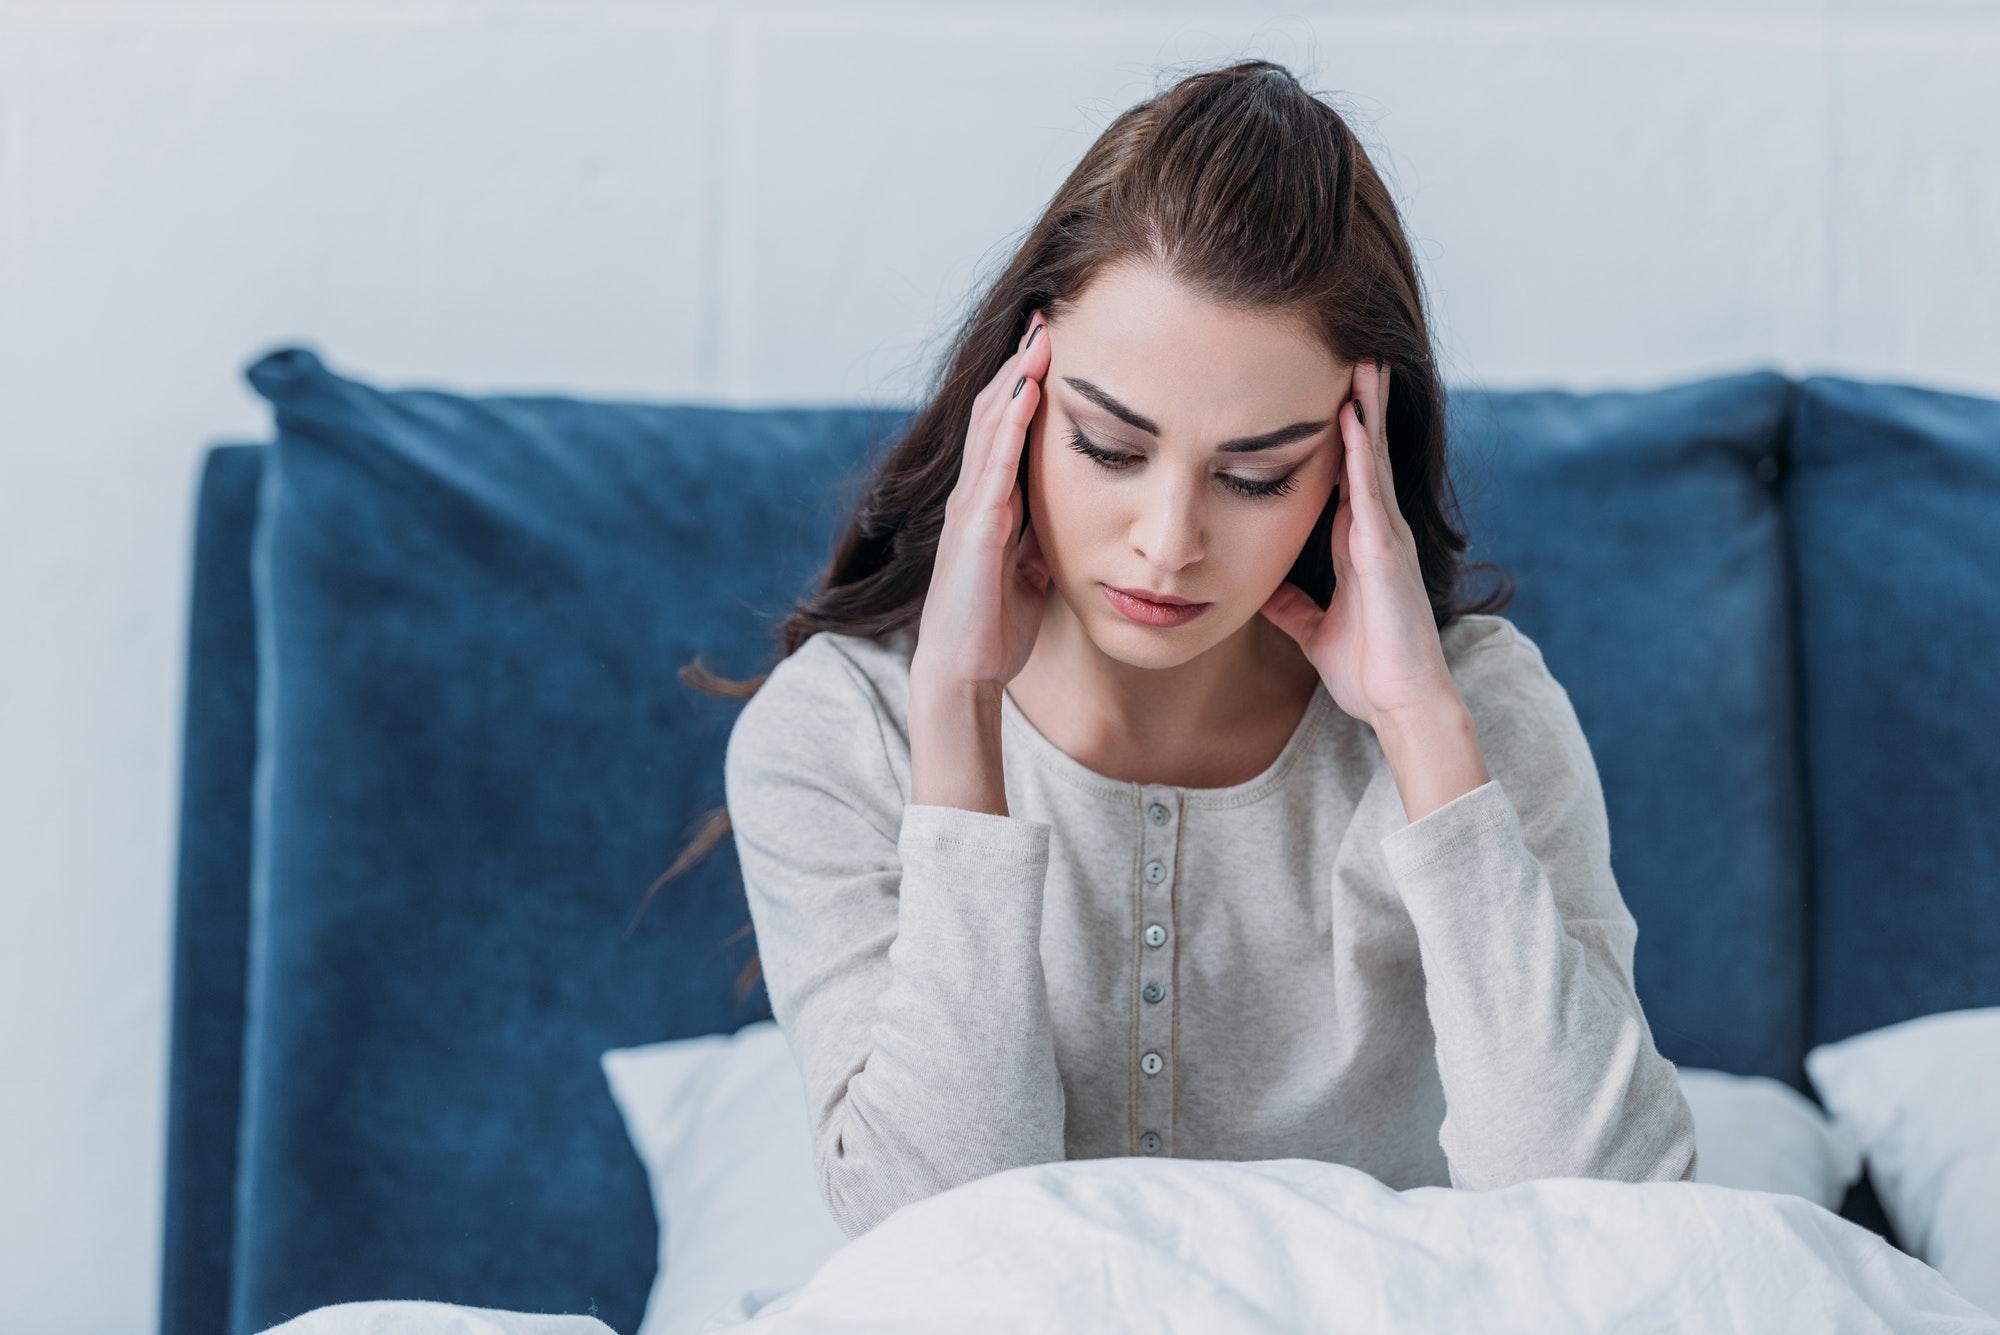 Waking Up With Eye Pain And Headache - The Causes & Treatment Options